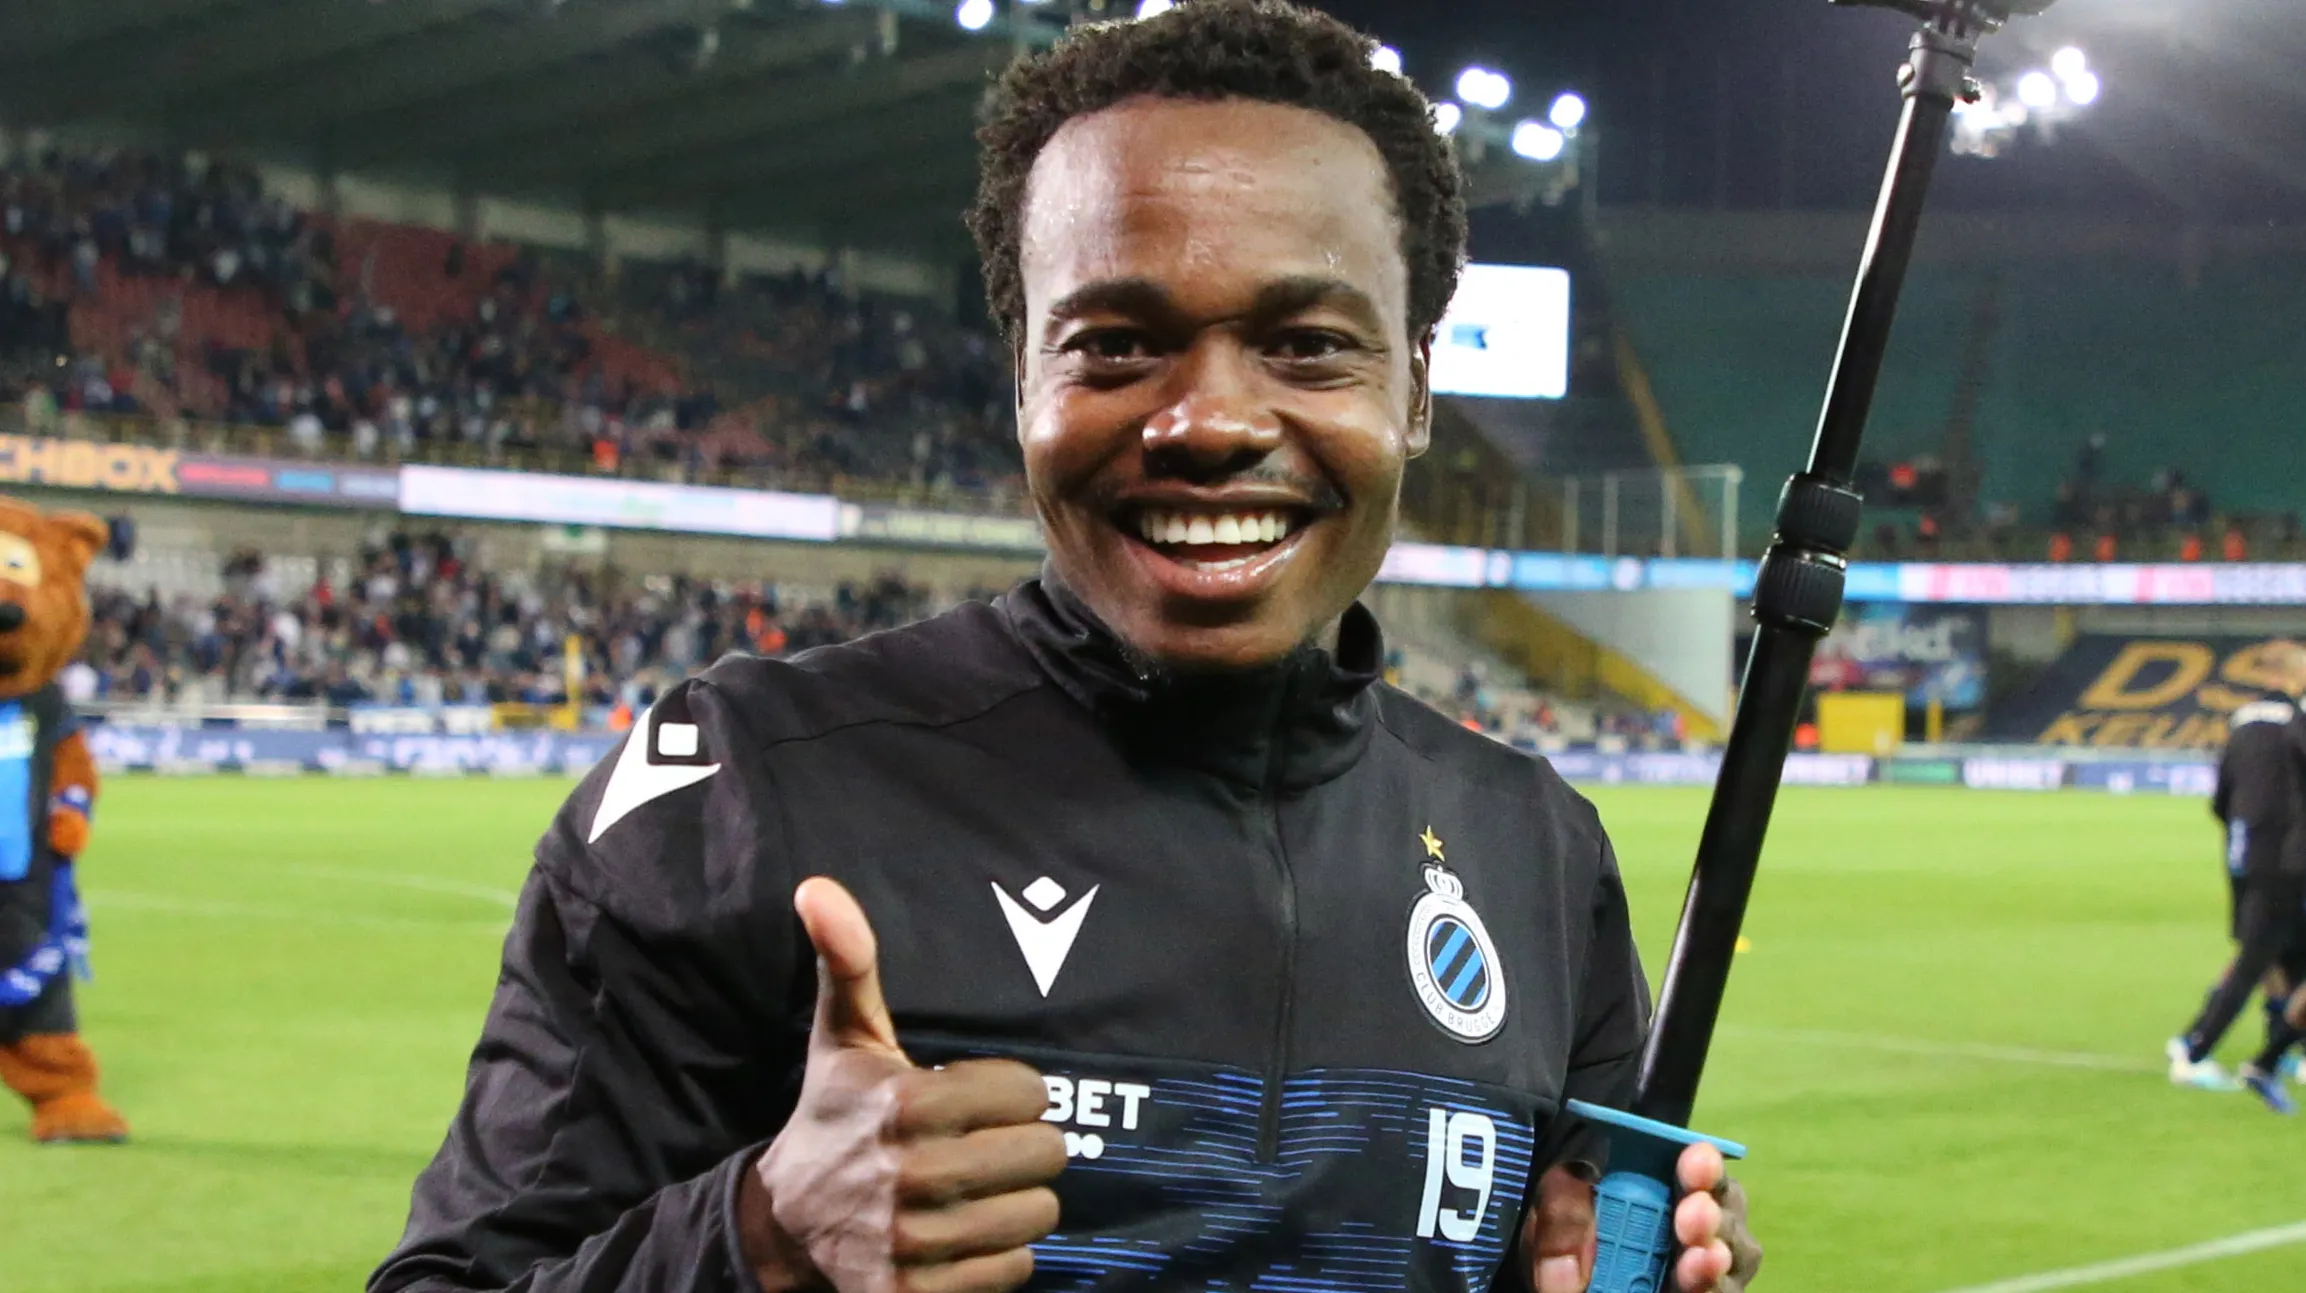 Percy Tau Finally Scores A Chance To Make His Mark On E